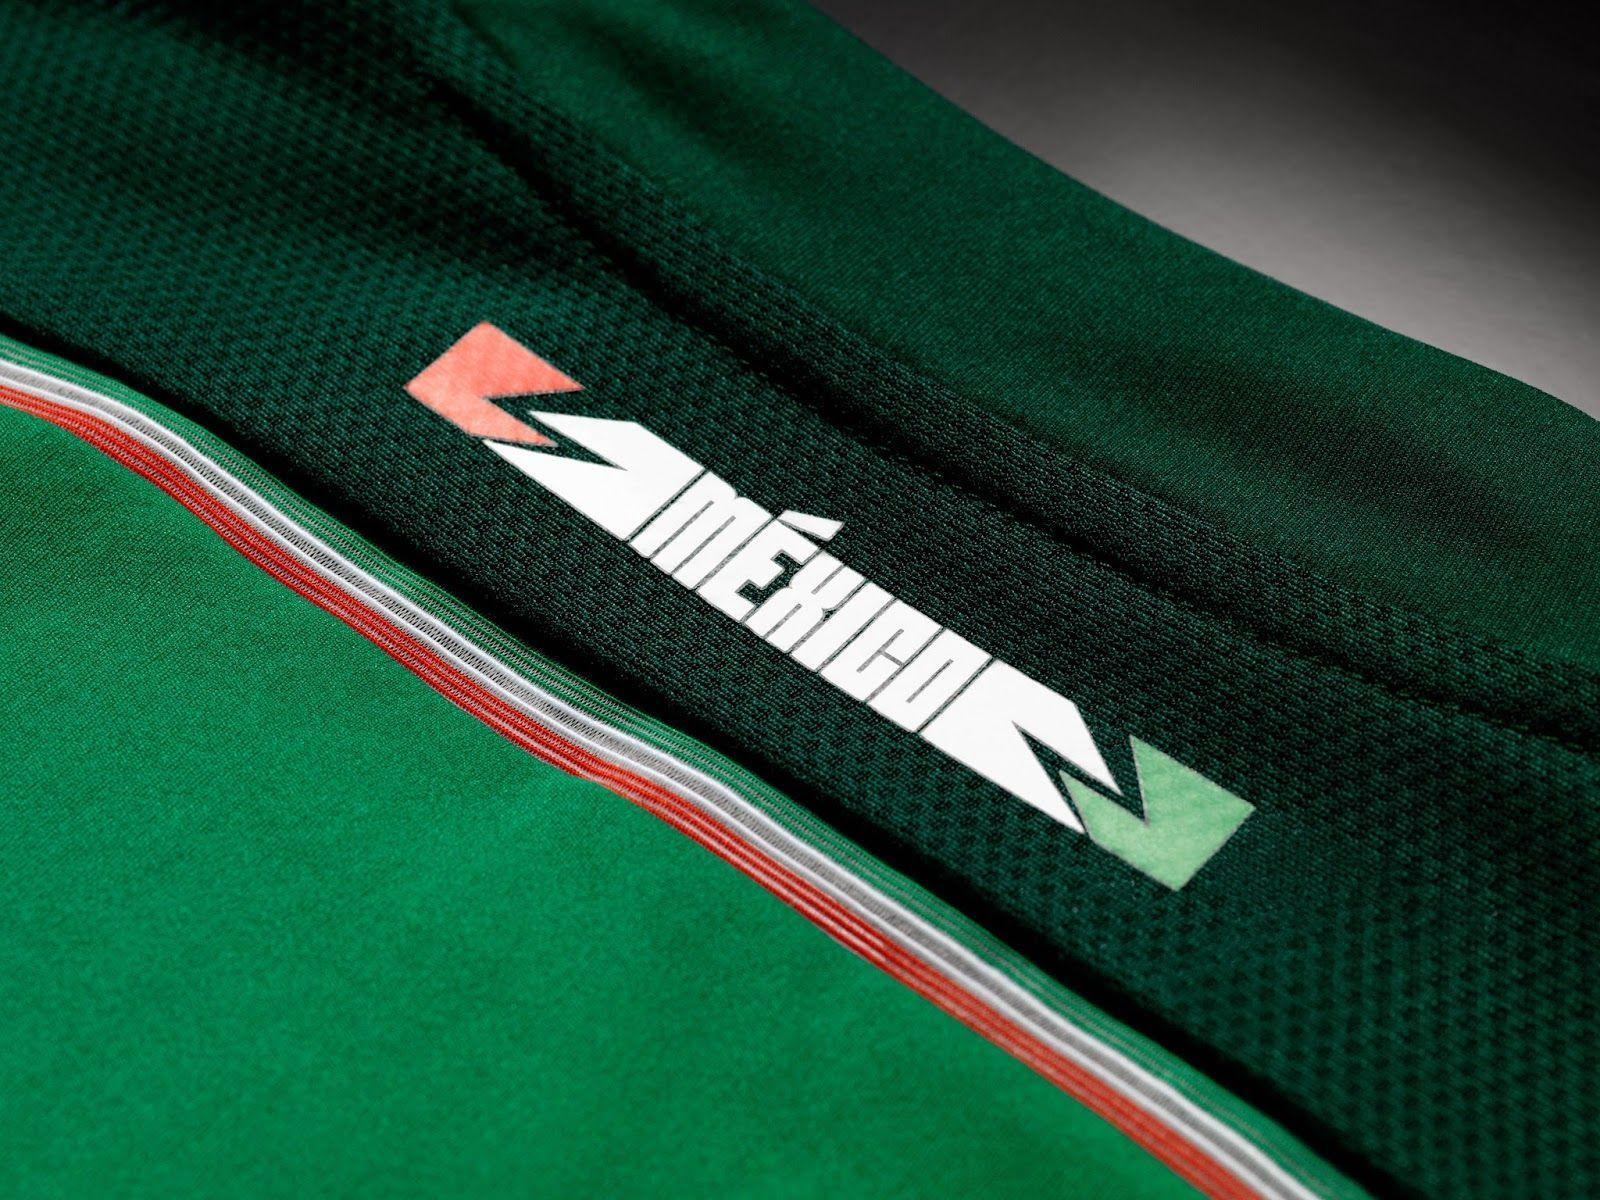 Mexico 2014 World Cup Kits Released